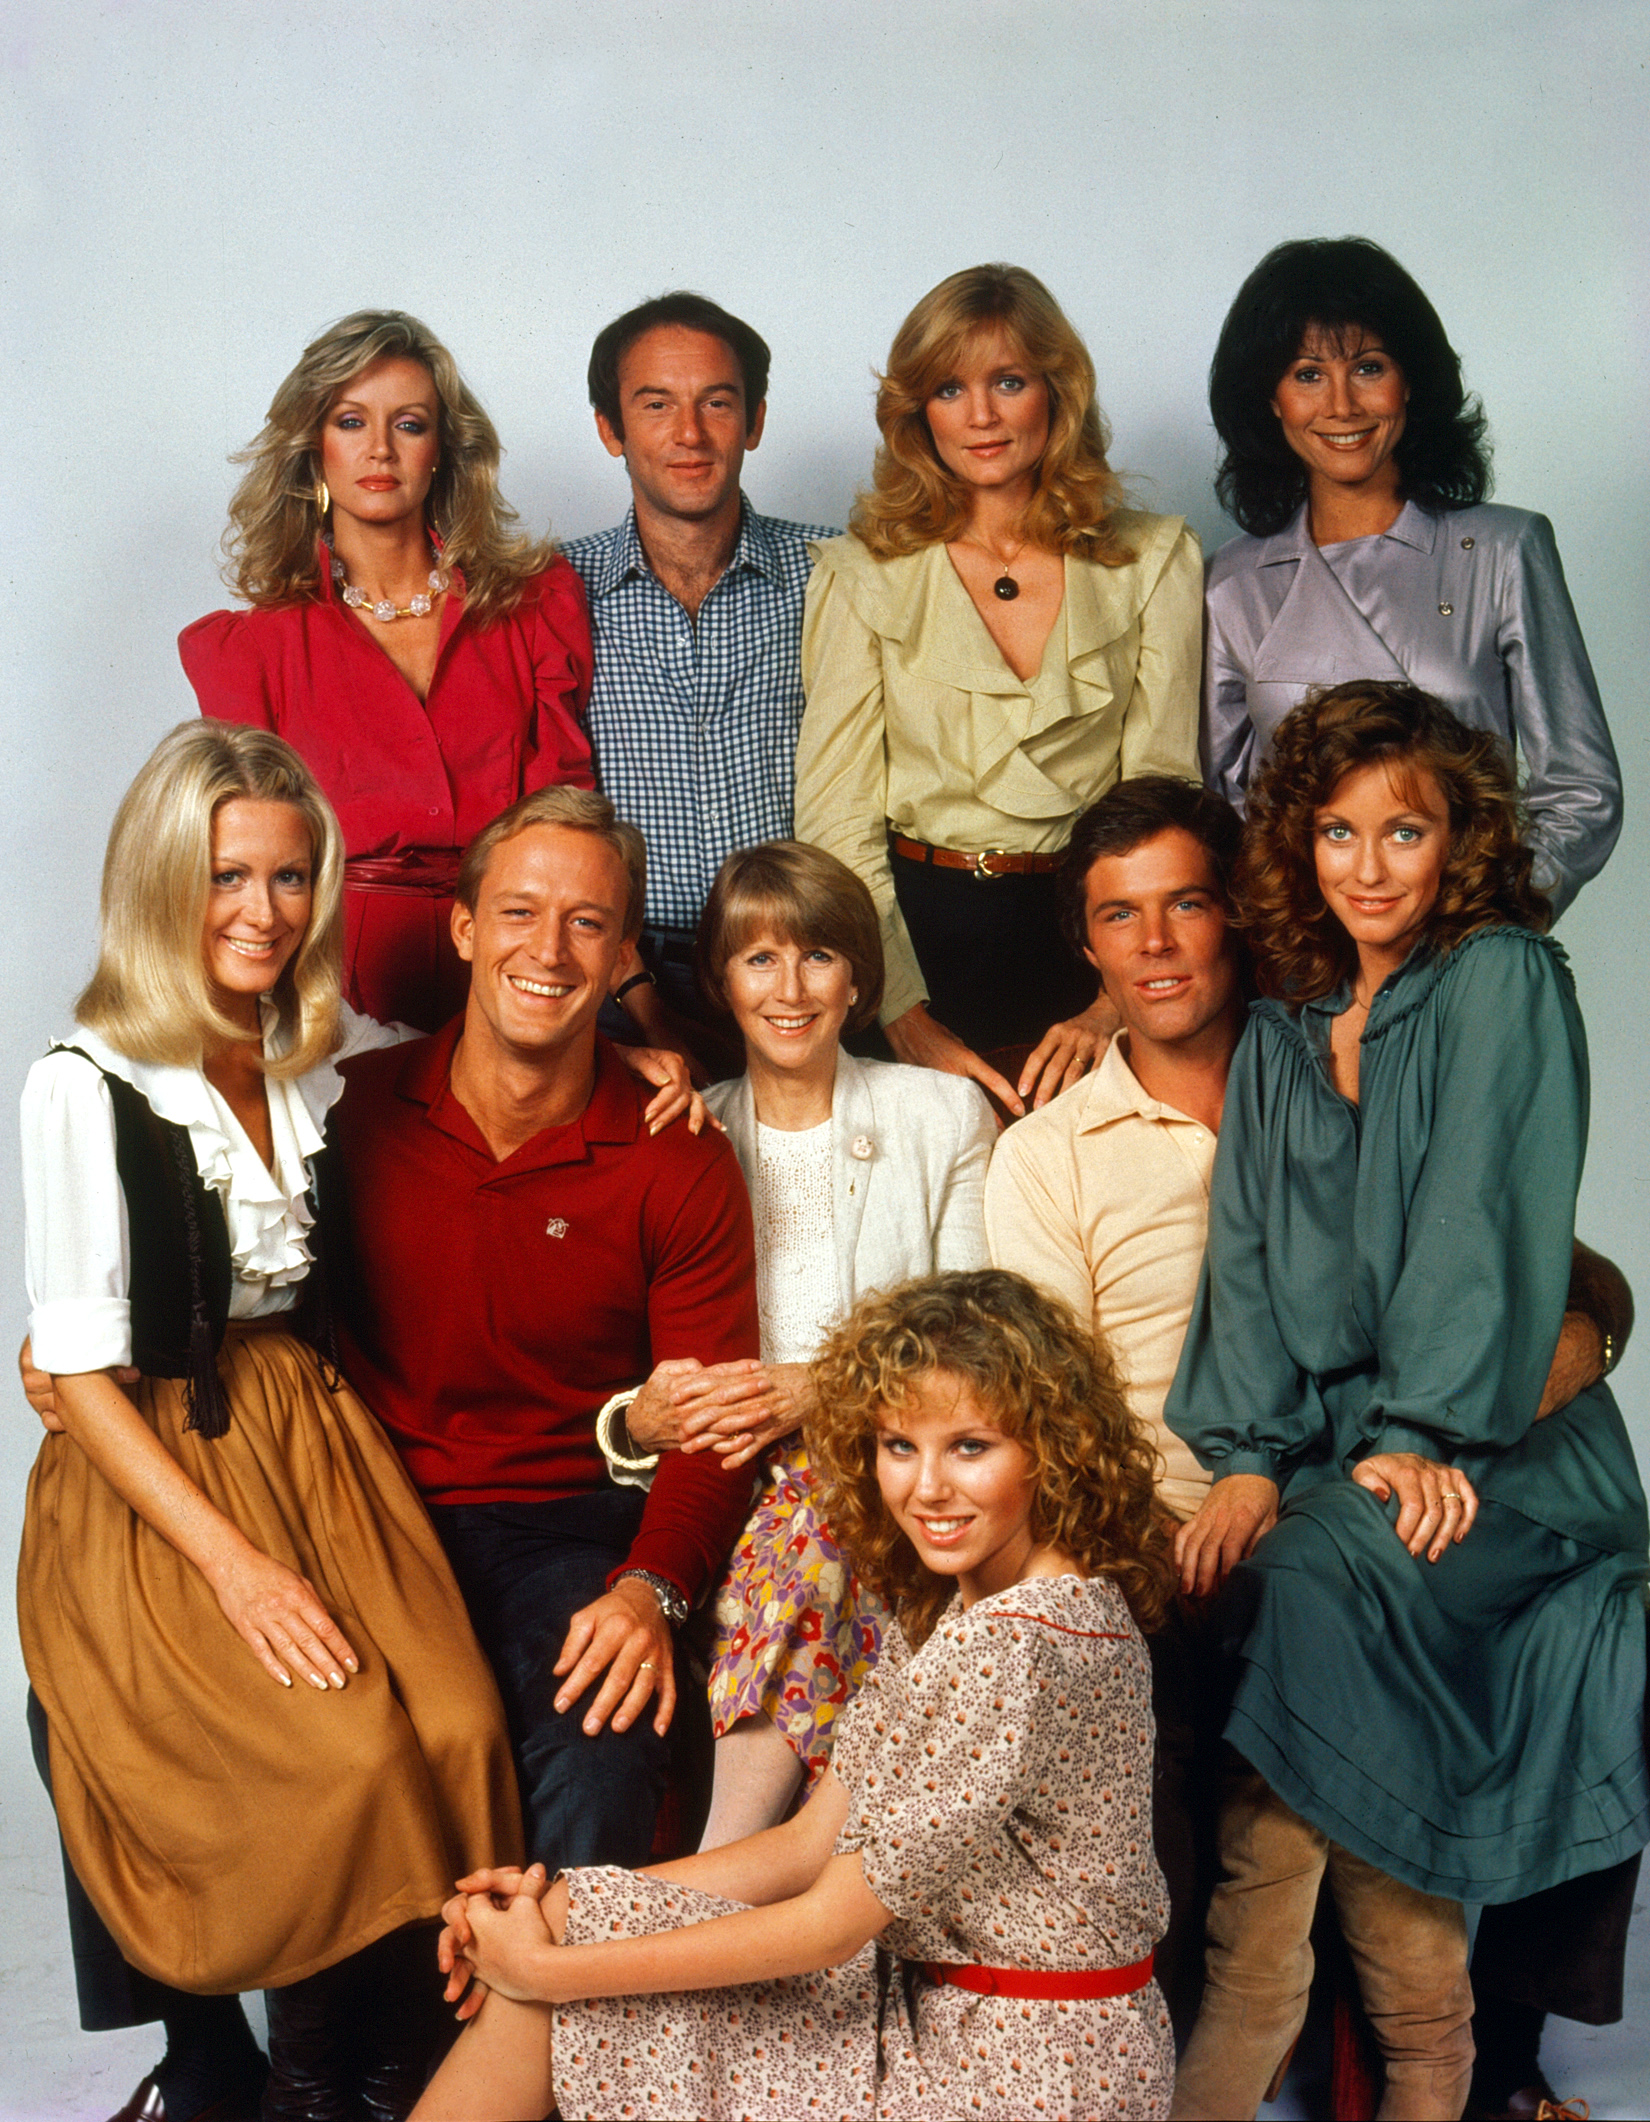 Cast members of the 1982 CBS television series "Knots Landing" are (L-R top) Donna Mills, John Pleshette, Constance McCashin, Michele Lee, (L-R middle) Joan Van Ark, Ted Shackleford, Julie Harris, James Houghton, Kim Lankford, and (bottom) Claudia Lonow. | Source: Getty Images